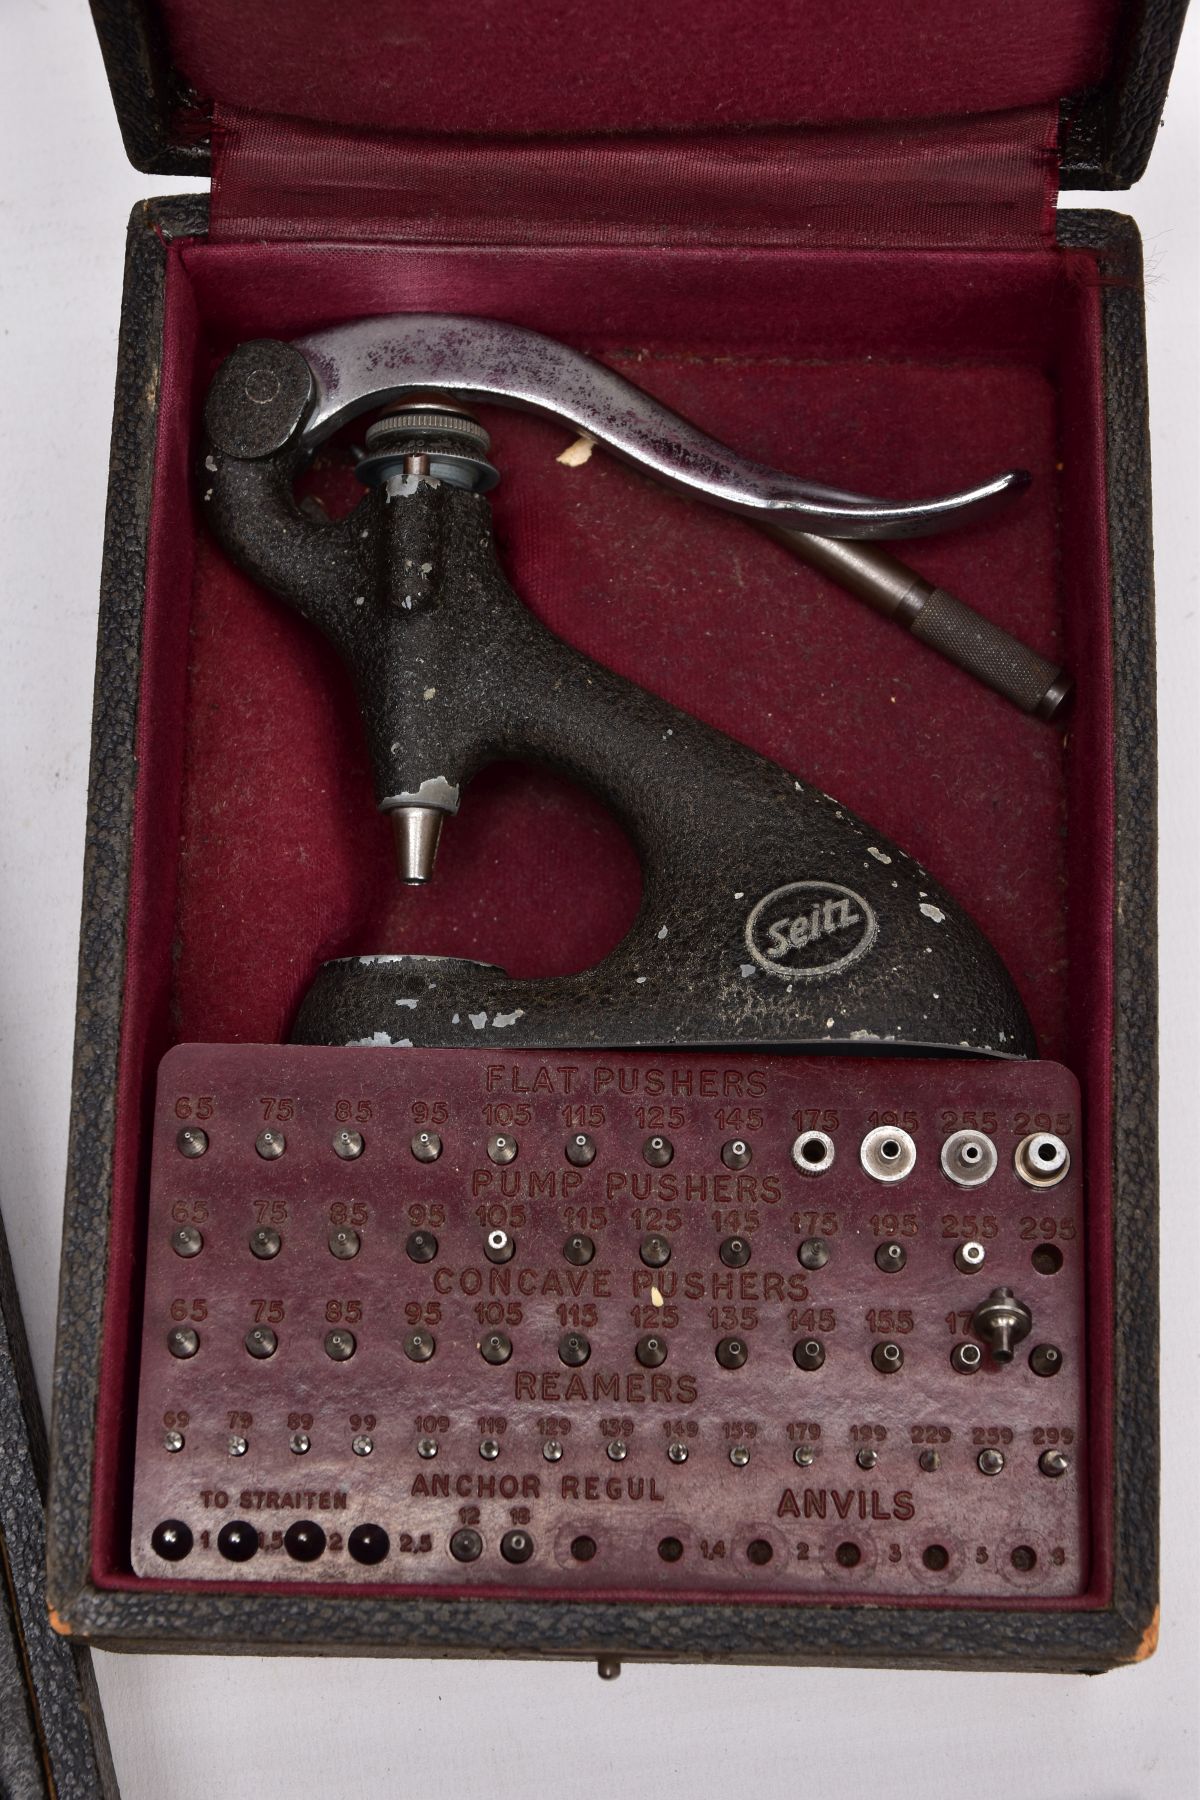 A 'SEITZ' JEWELLING TOOL AND RUBIS FRICTION JEWELS SET, pressing tool with accompanying incomplete - Image 10 of 24